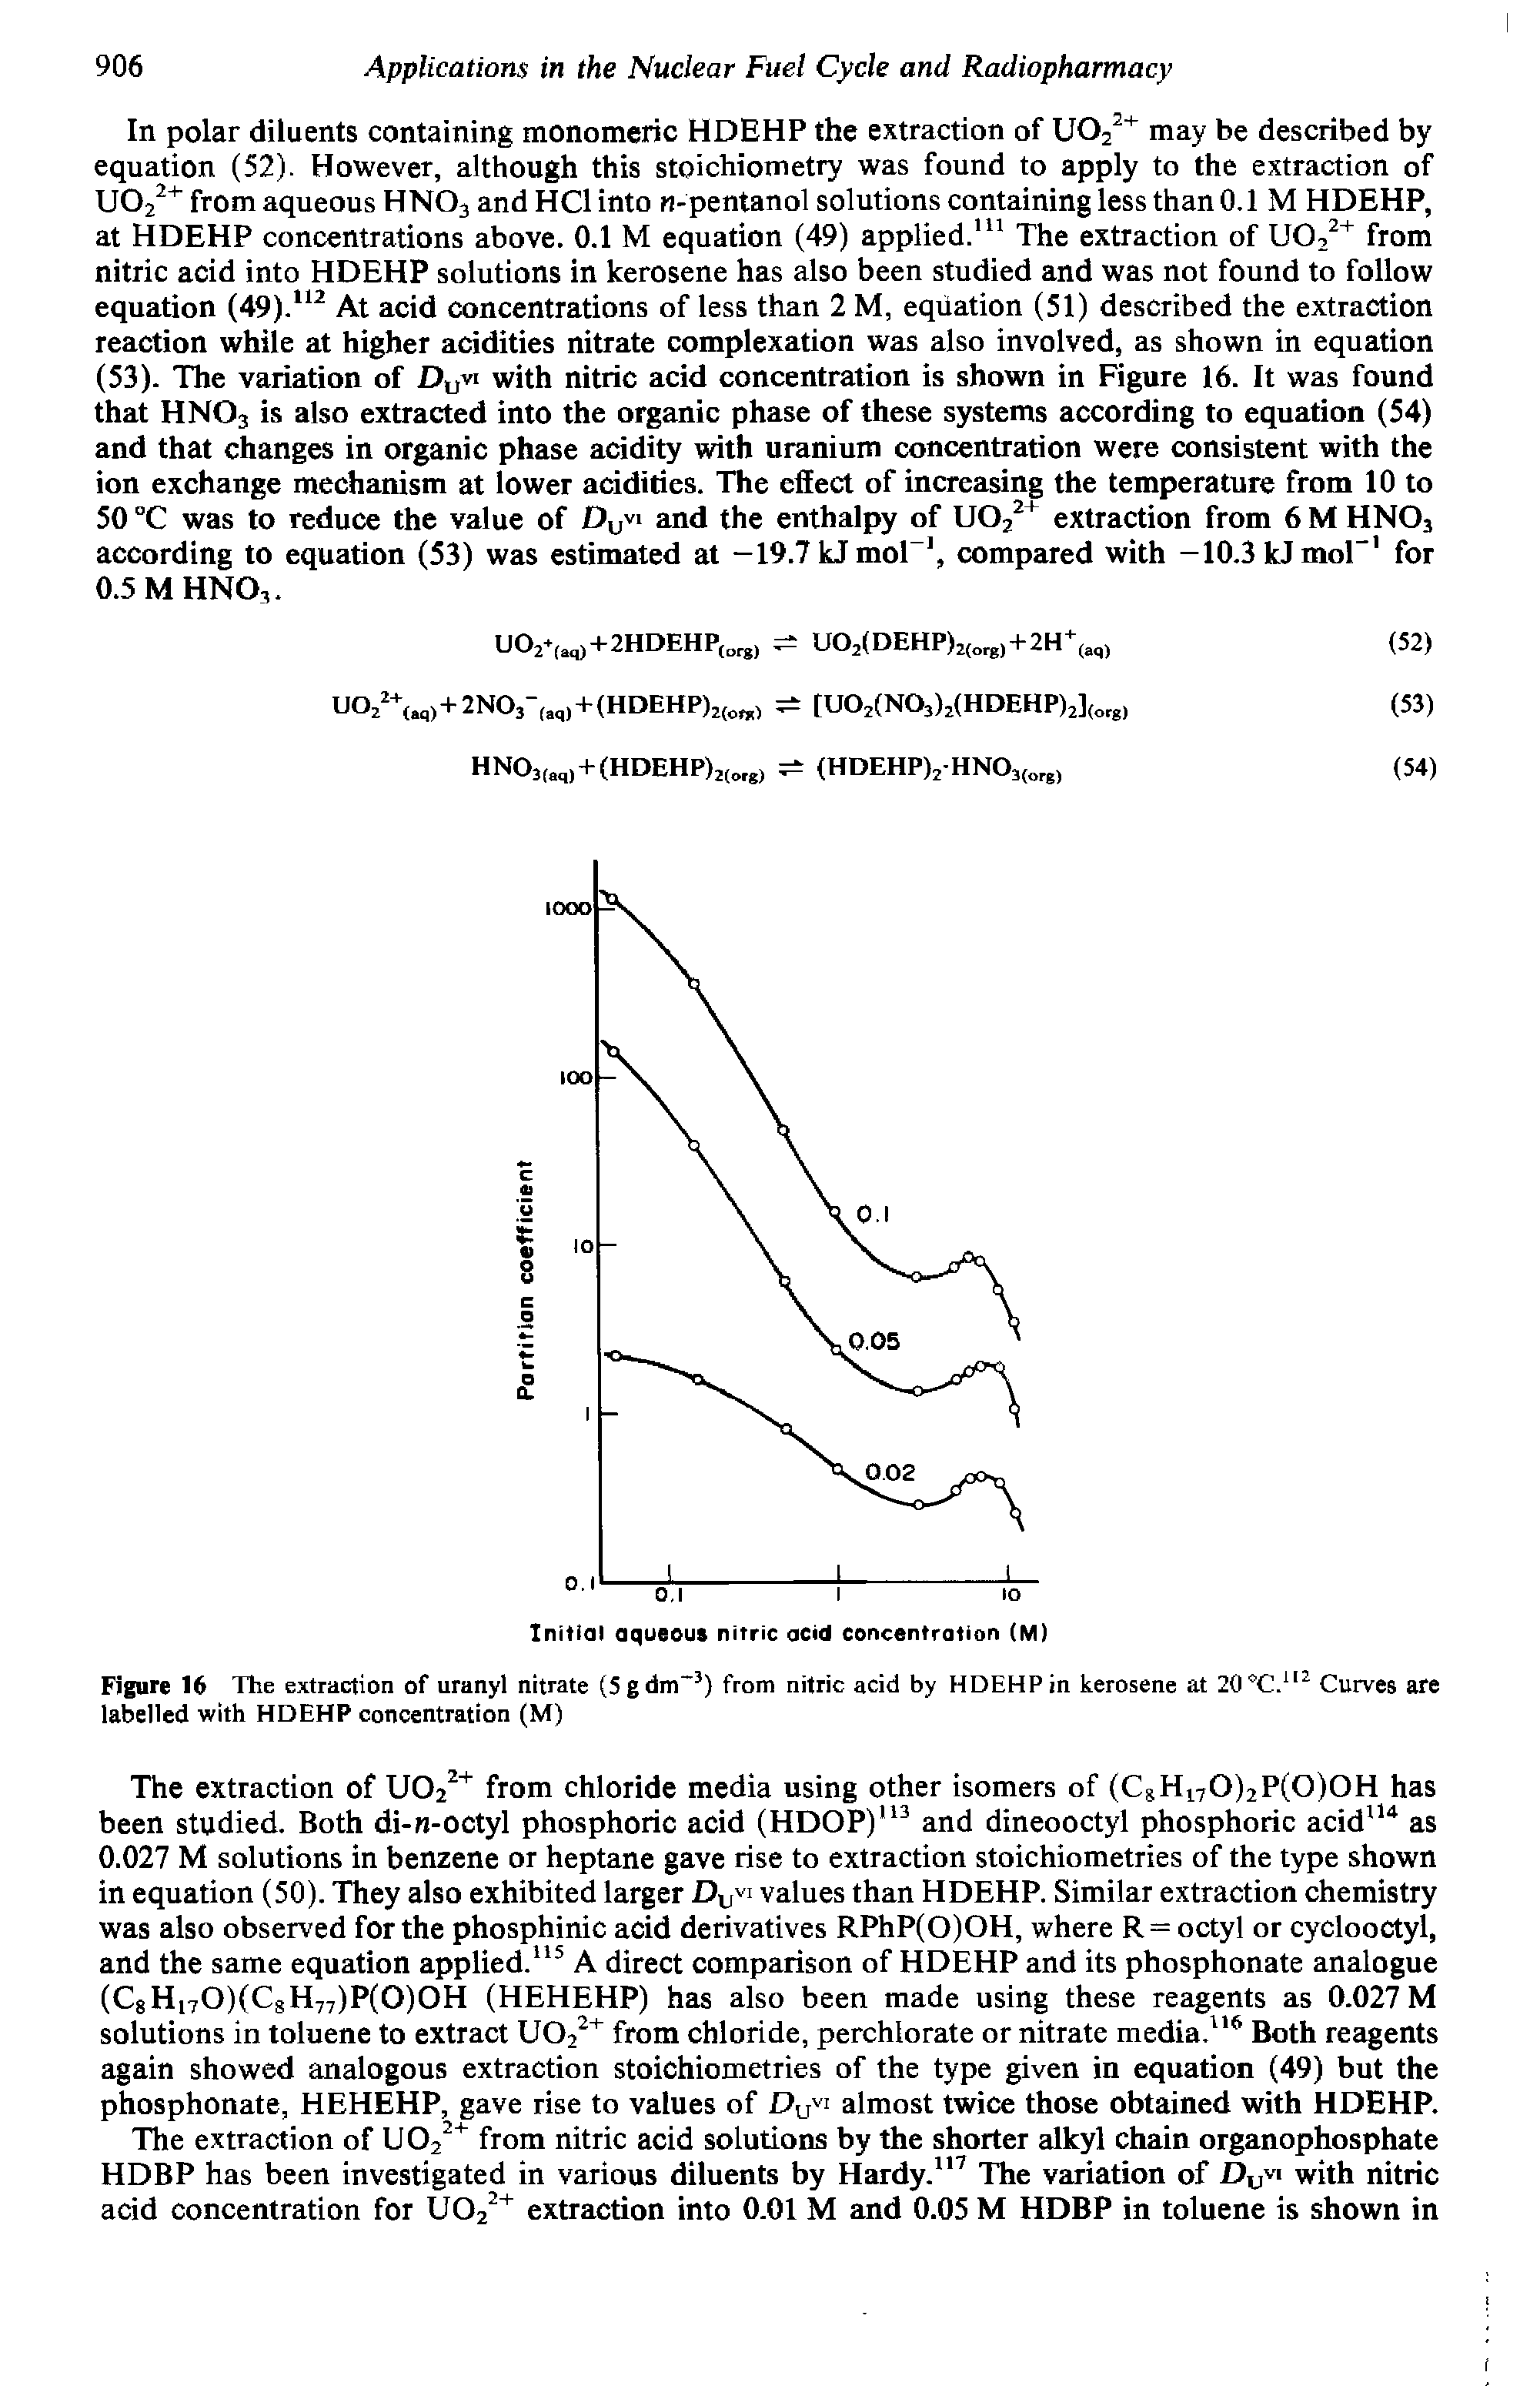 Figure 16 The extraction of uranyl nitrate (5gdm 3) from nitric acid by HDEHP in kerosene at 2(1 C.112 Curves are labelled with HDEHP concentration (M)...